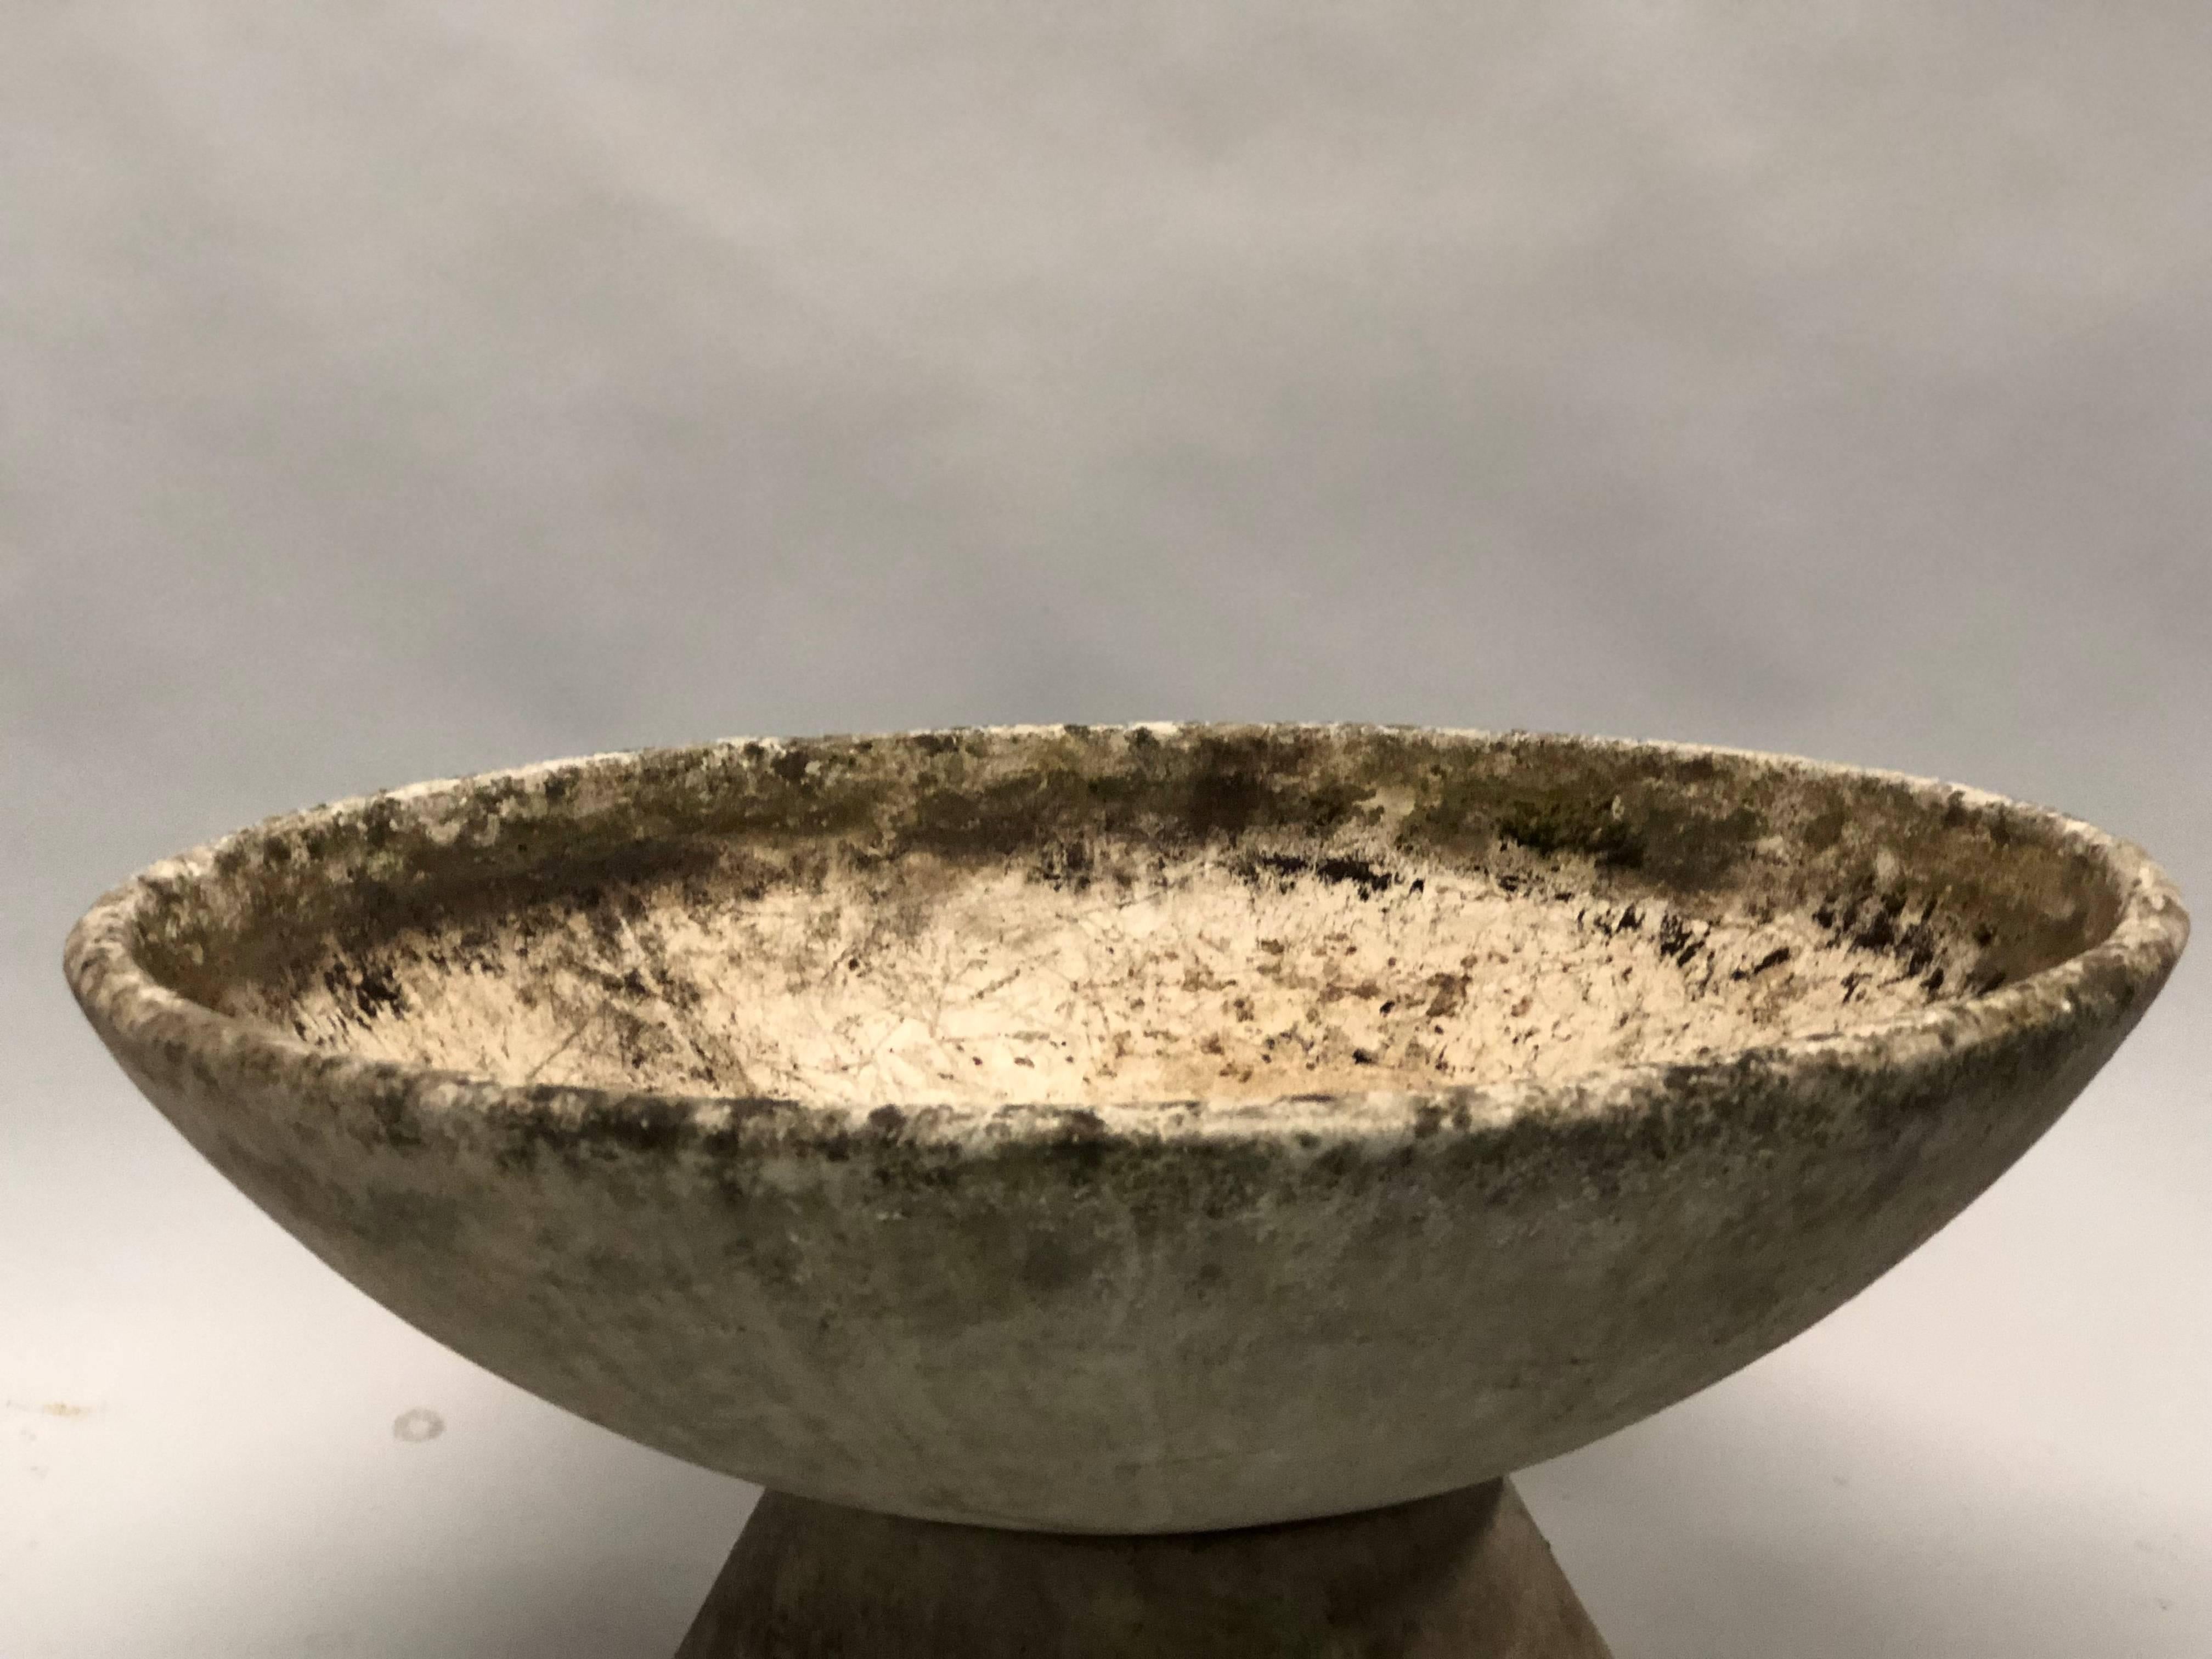 1 Large Mid-Century Modern Fiber Concrete Architectural Planter by Willy Guhl In Good Condition For Sale In New York, NY